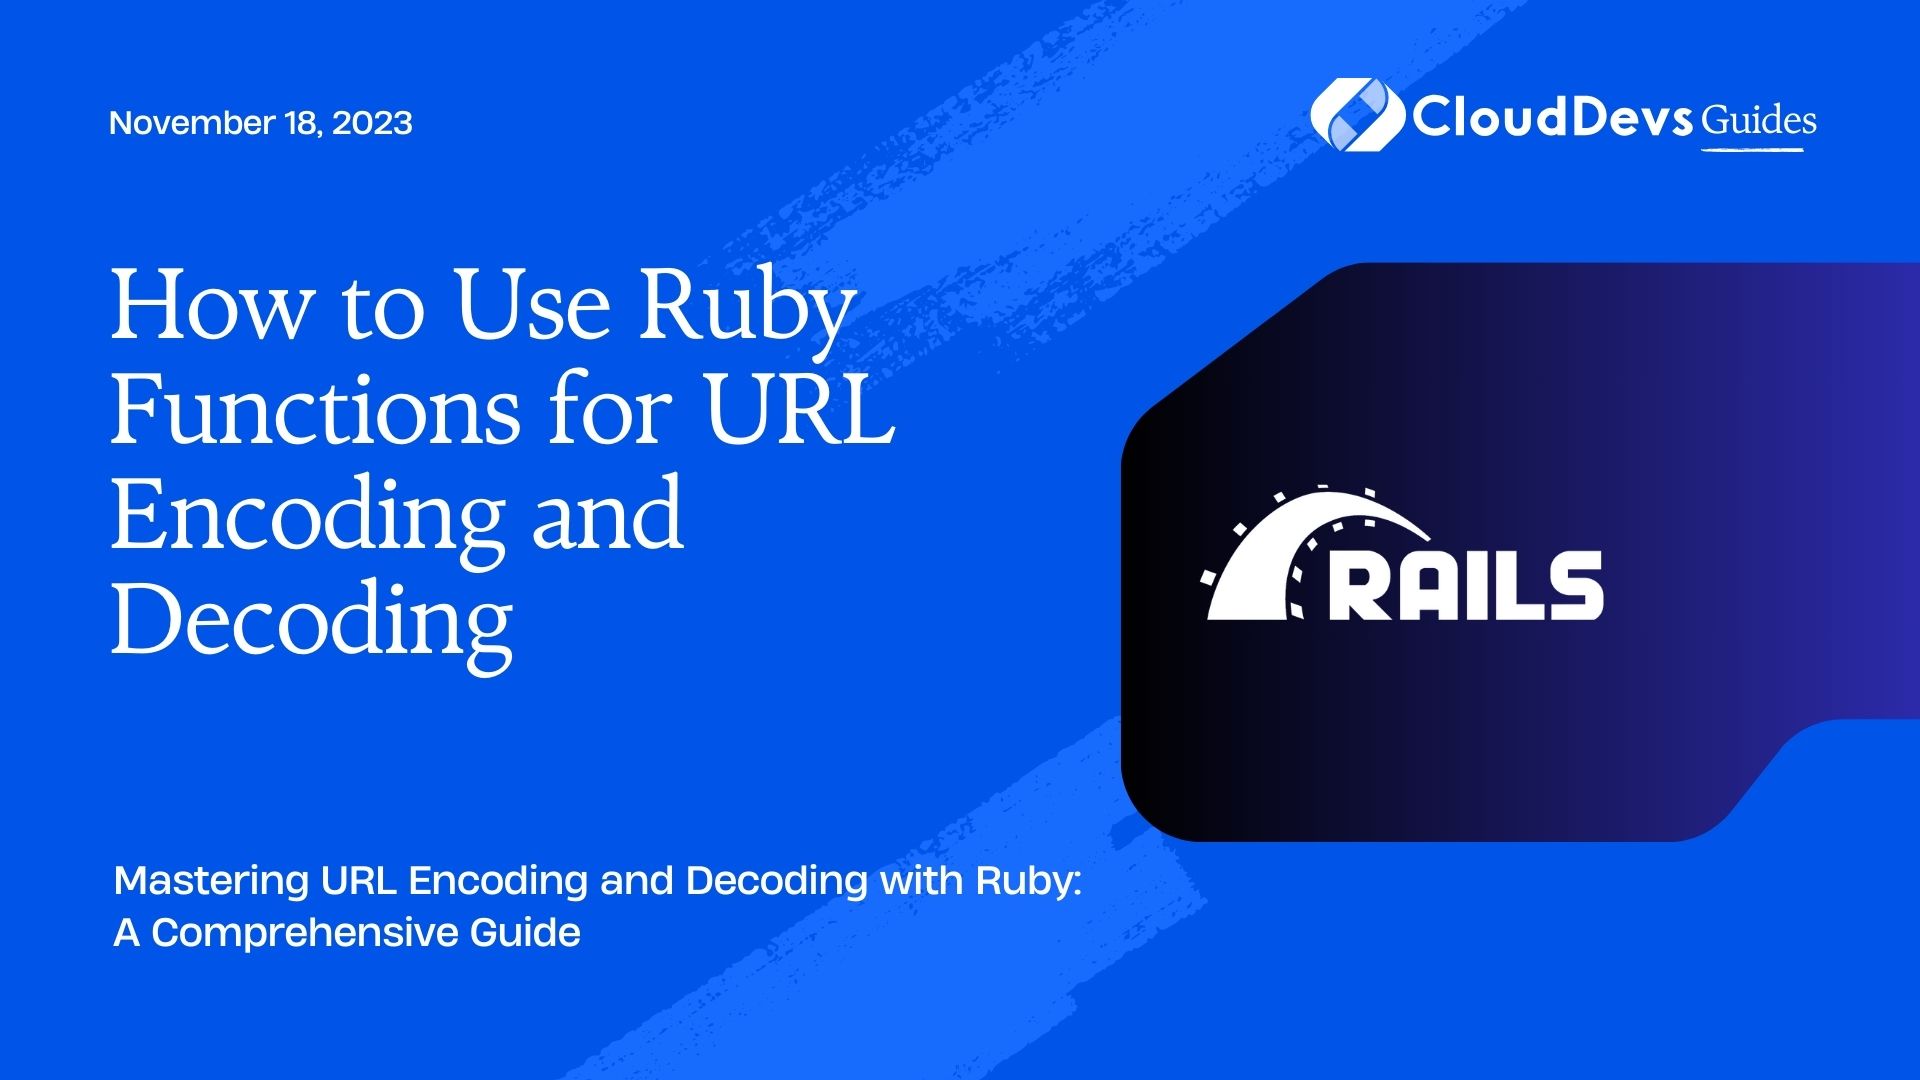 How to Use Ruby Functions for URL Encoding and Decoding